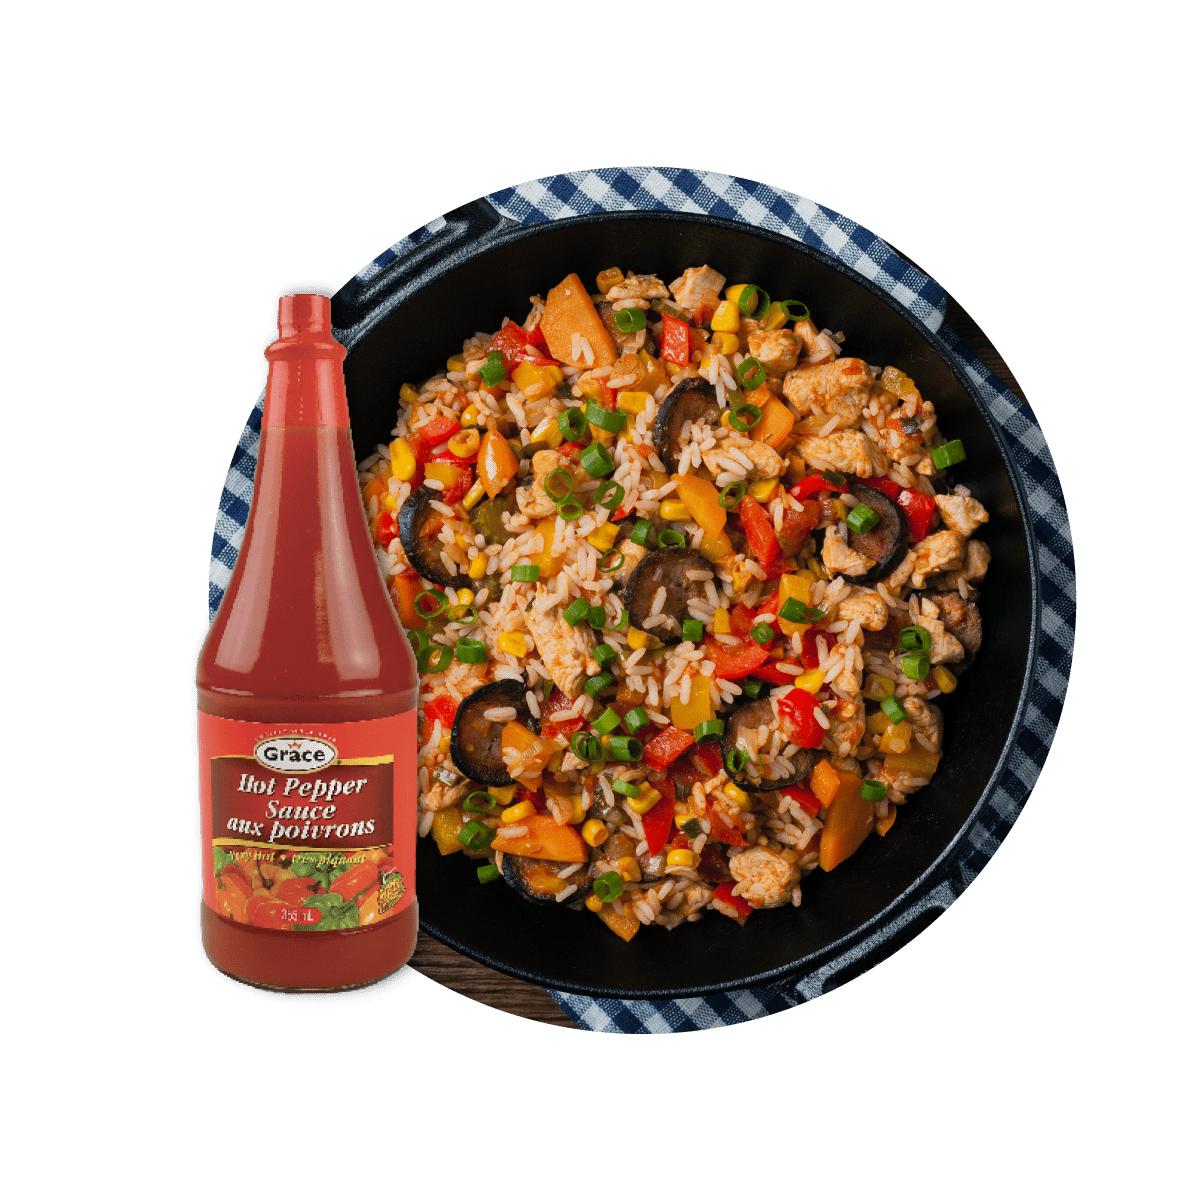 Creole HotPepperSauce small 3